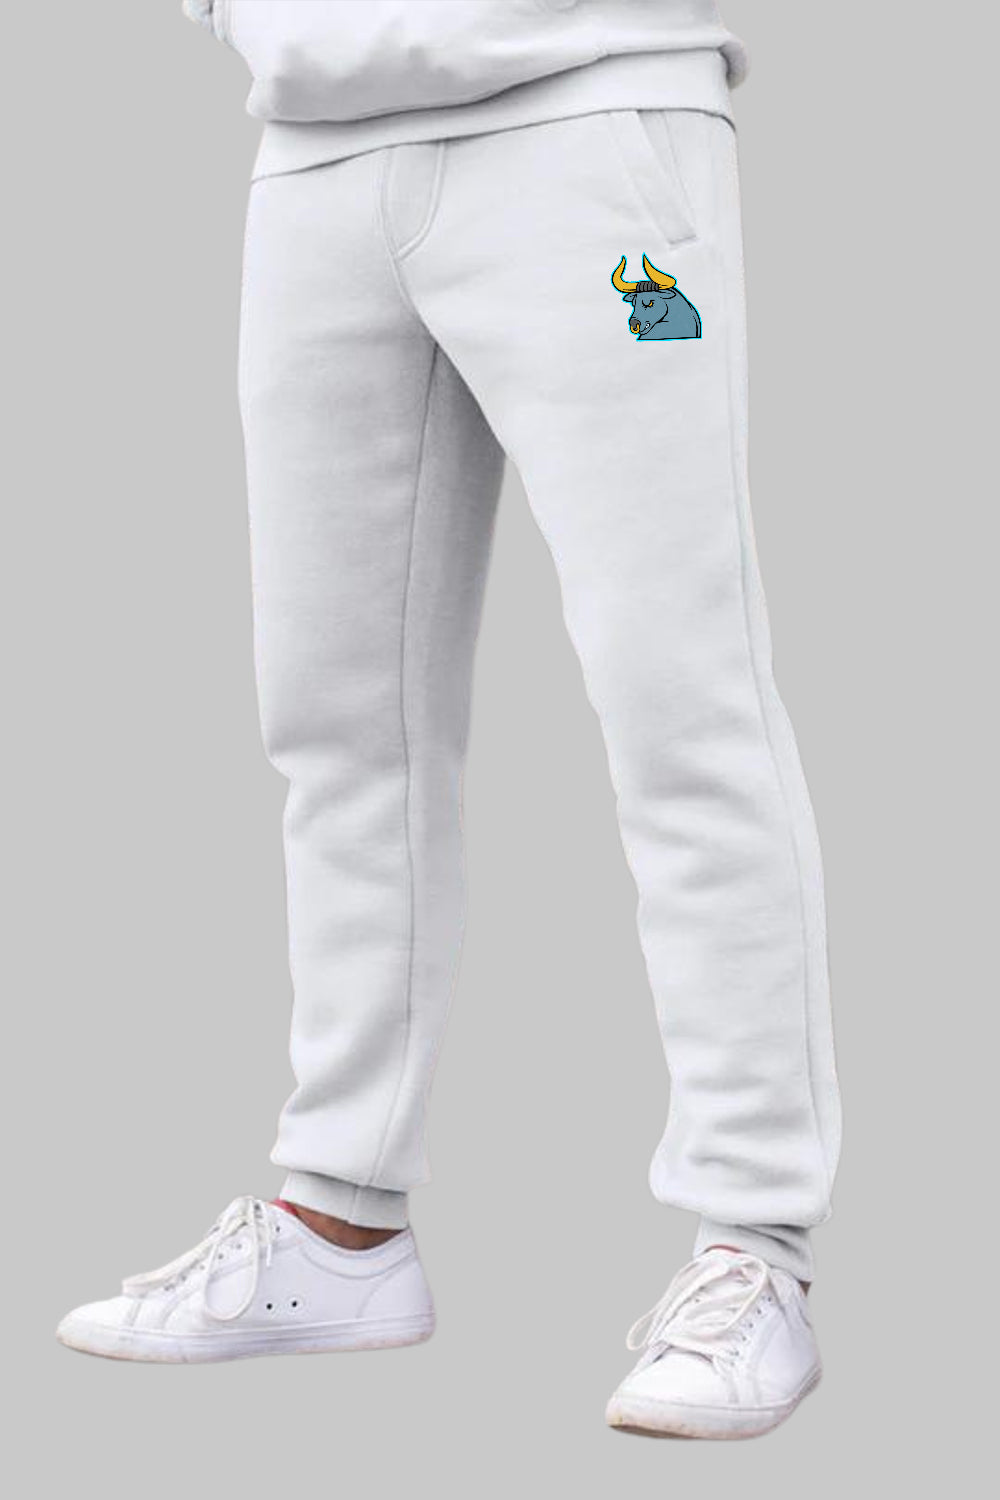 Bull Graphic Printed White Joggers